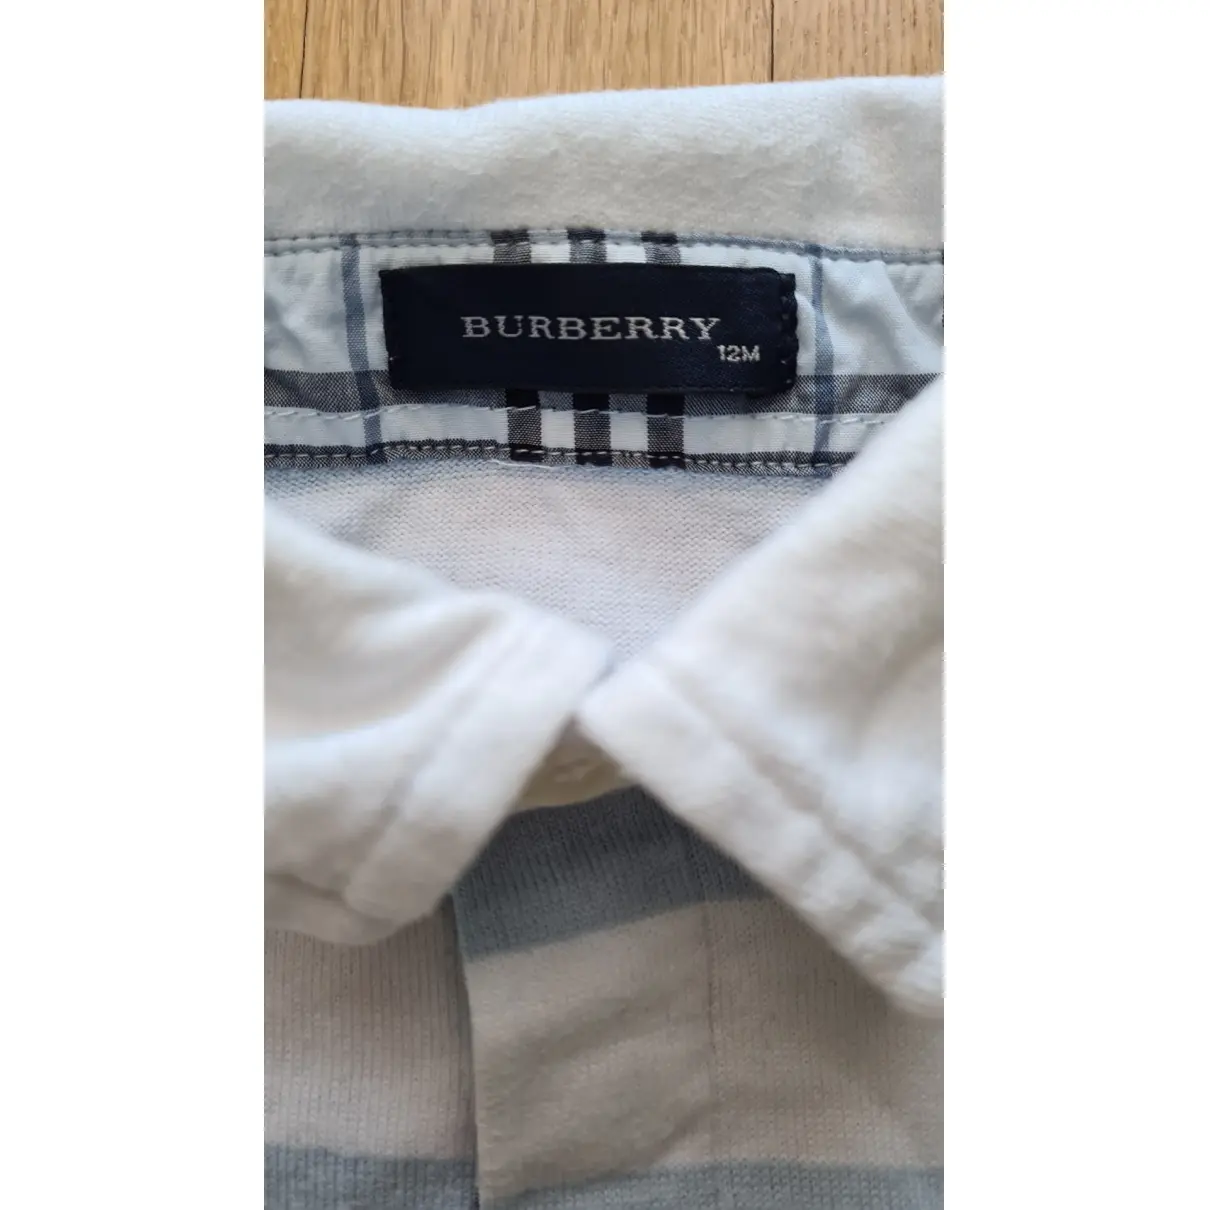 Buy Burberry Polo online